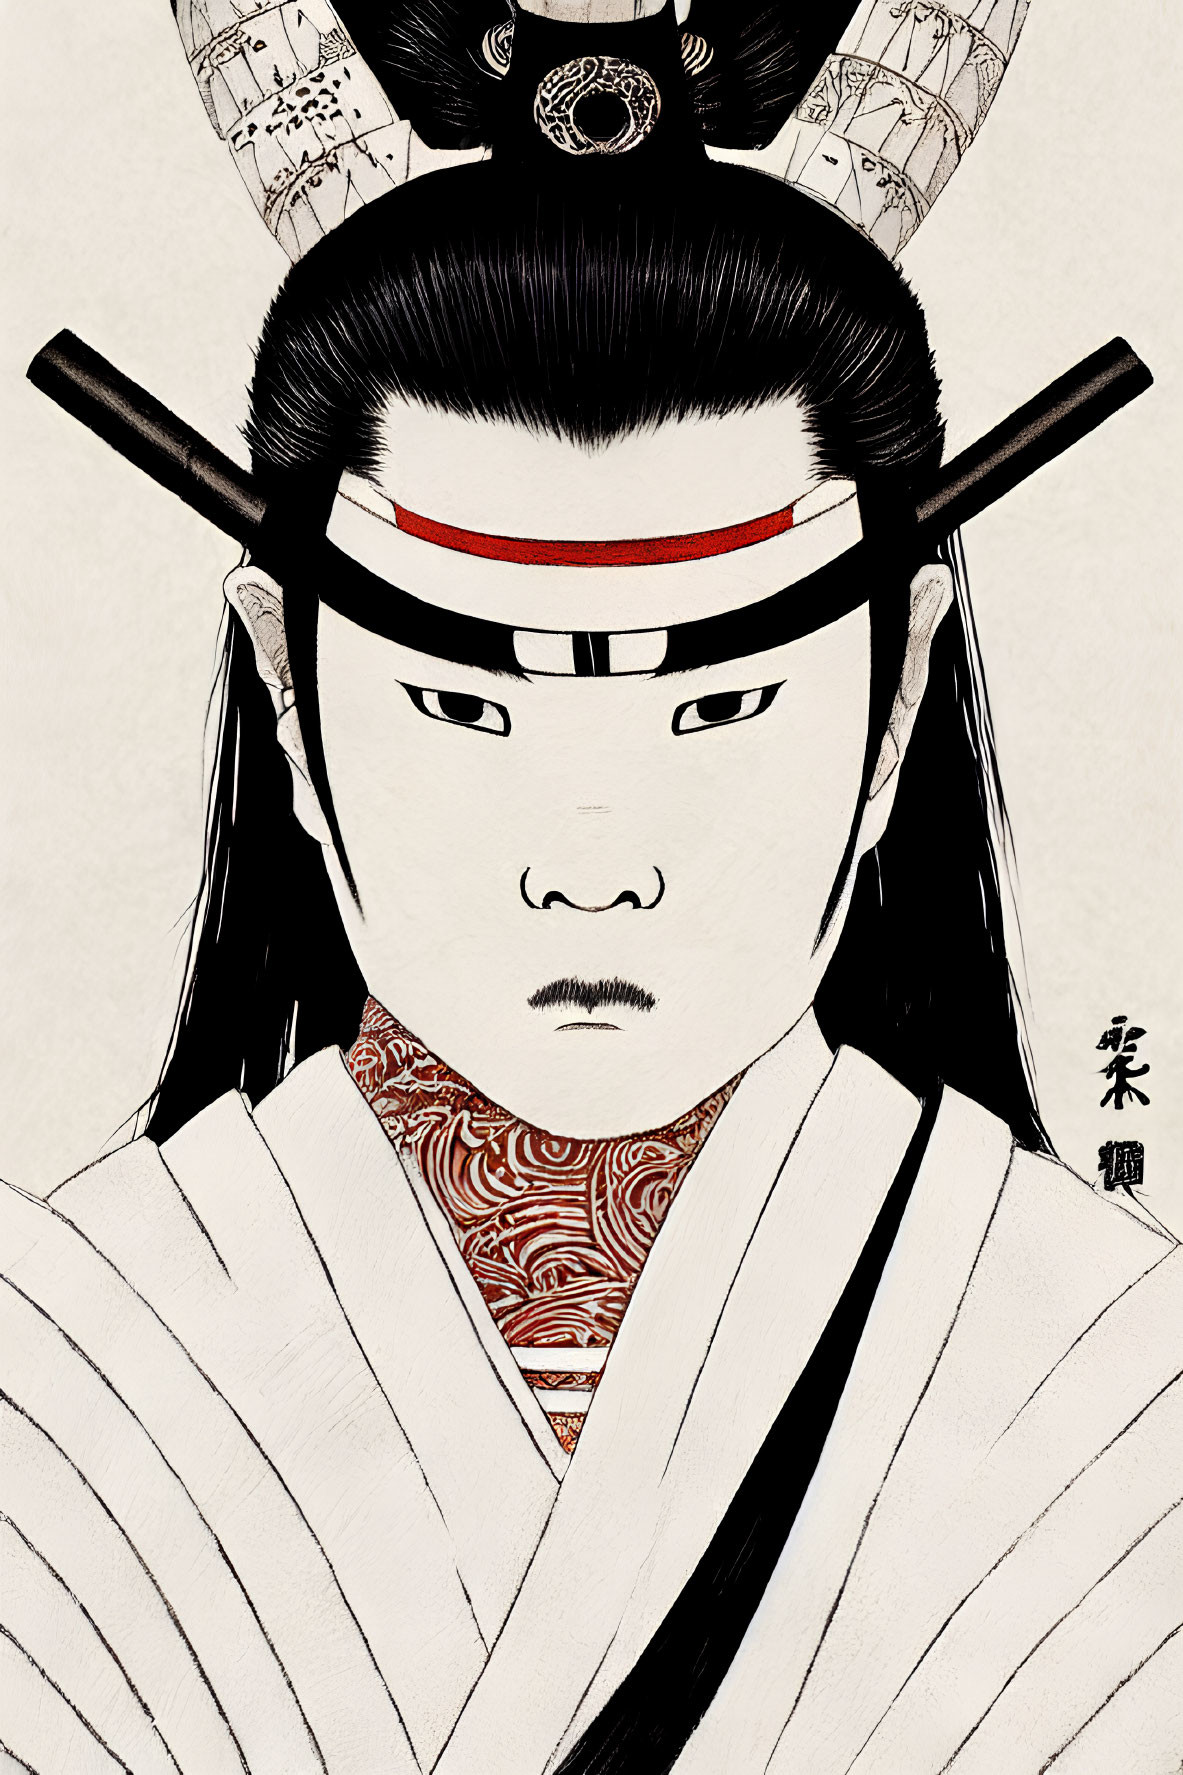 Traditional East Asian man in historical clothing with stern expression and Asian script.